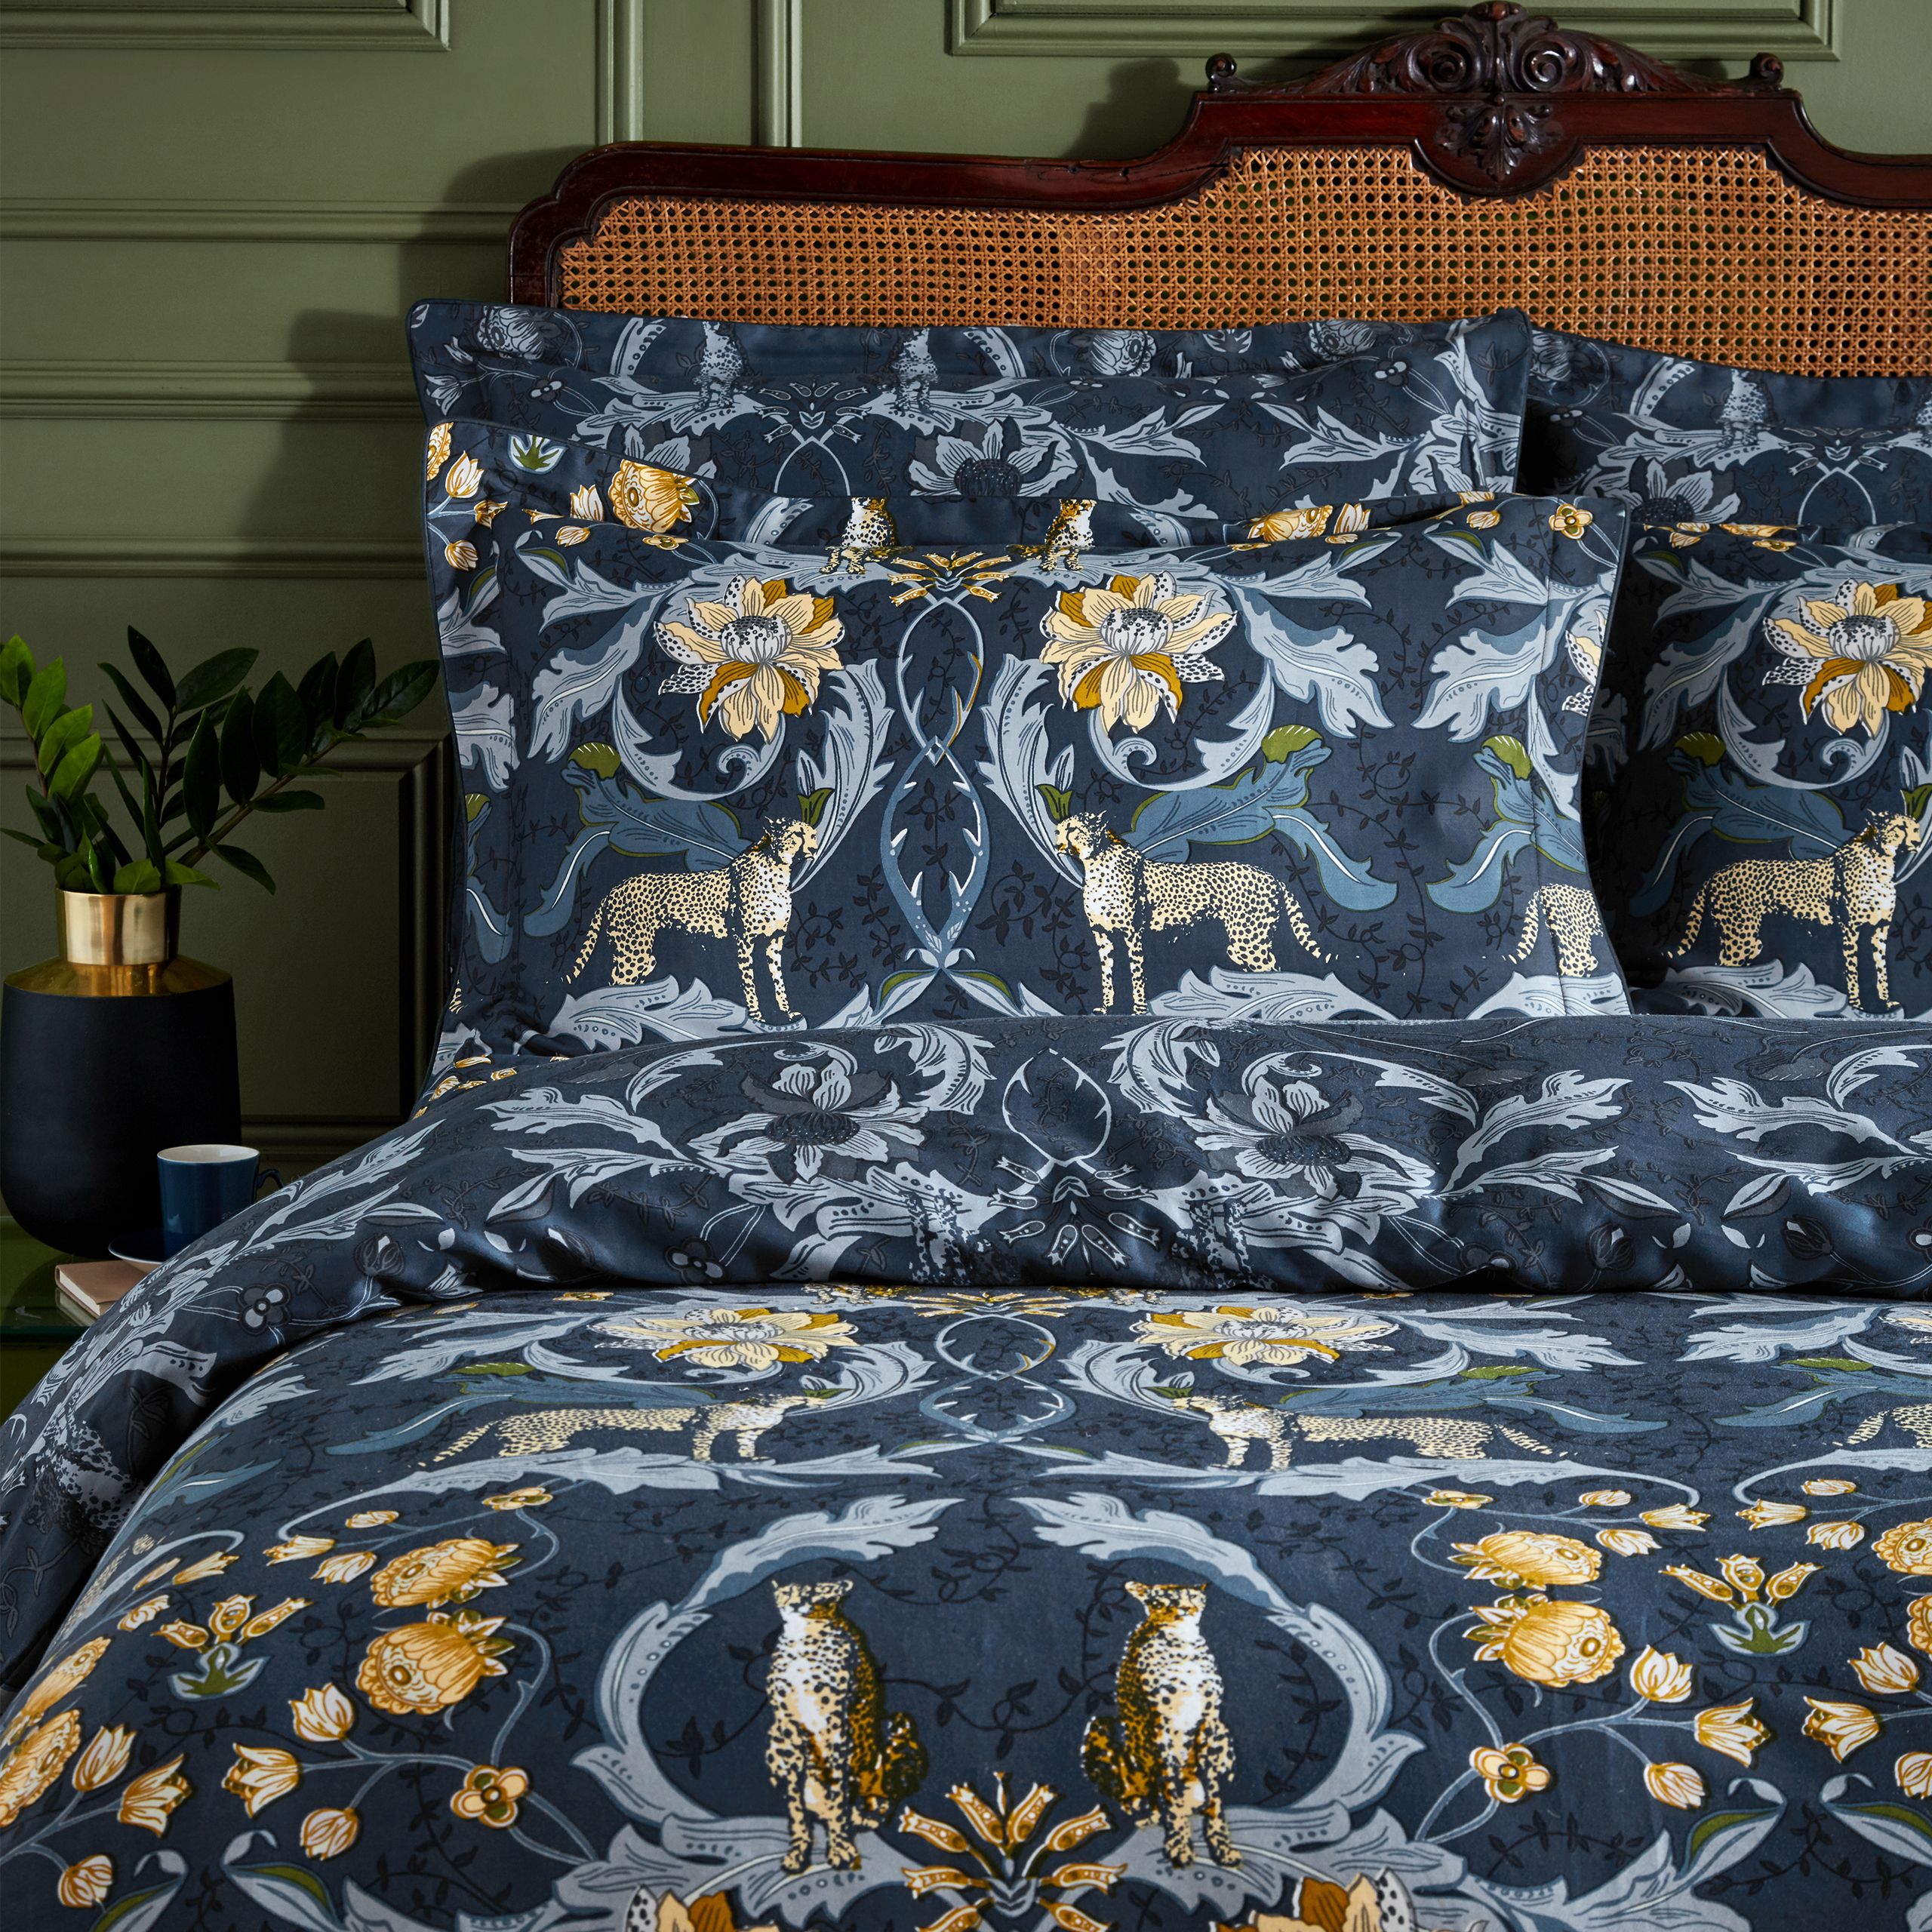 Inspired by Art Nouveau botanical illustrations, Nouvilla is a highly decorative design featuring charming cheetahs amongst meandering curves of plants and flowers. This luxury cotton sateen bedding features contrast piping, oxford edge pillowcases and a tonal coordinating print on the duvet cover reverse. This duvet cover set has been produced to a meticulous standard, with a thread count of 200 threads per square inch, to ensure a soft, smooth and long-lasting fabric.